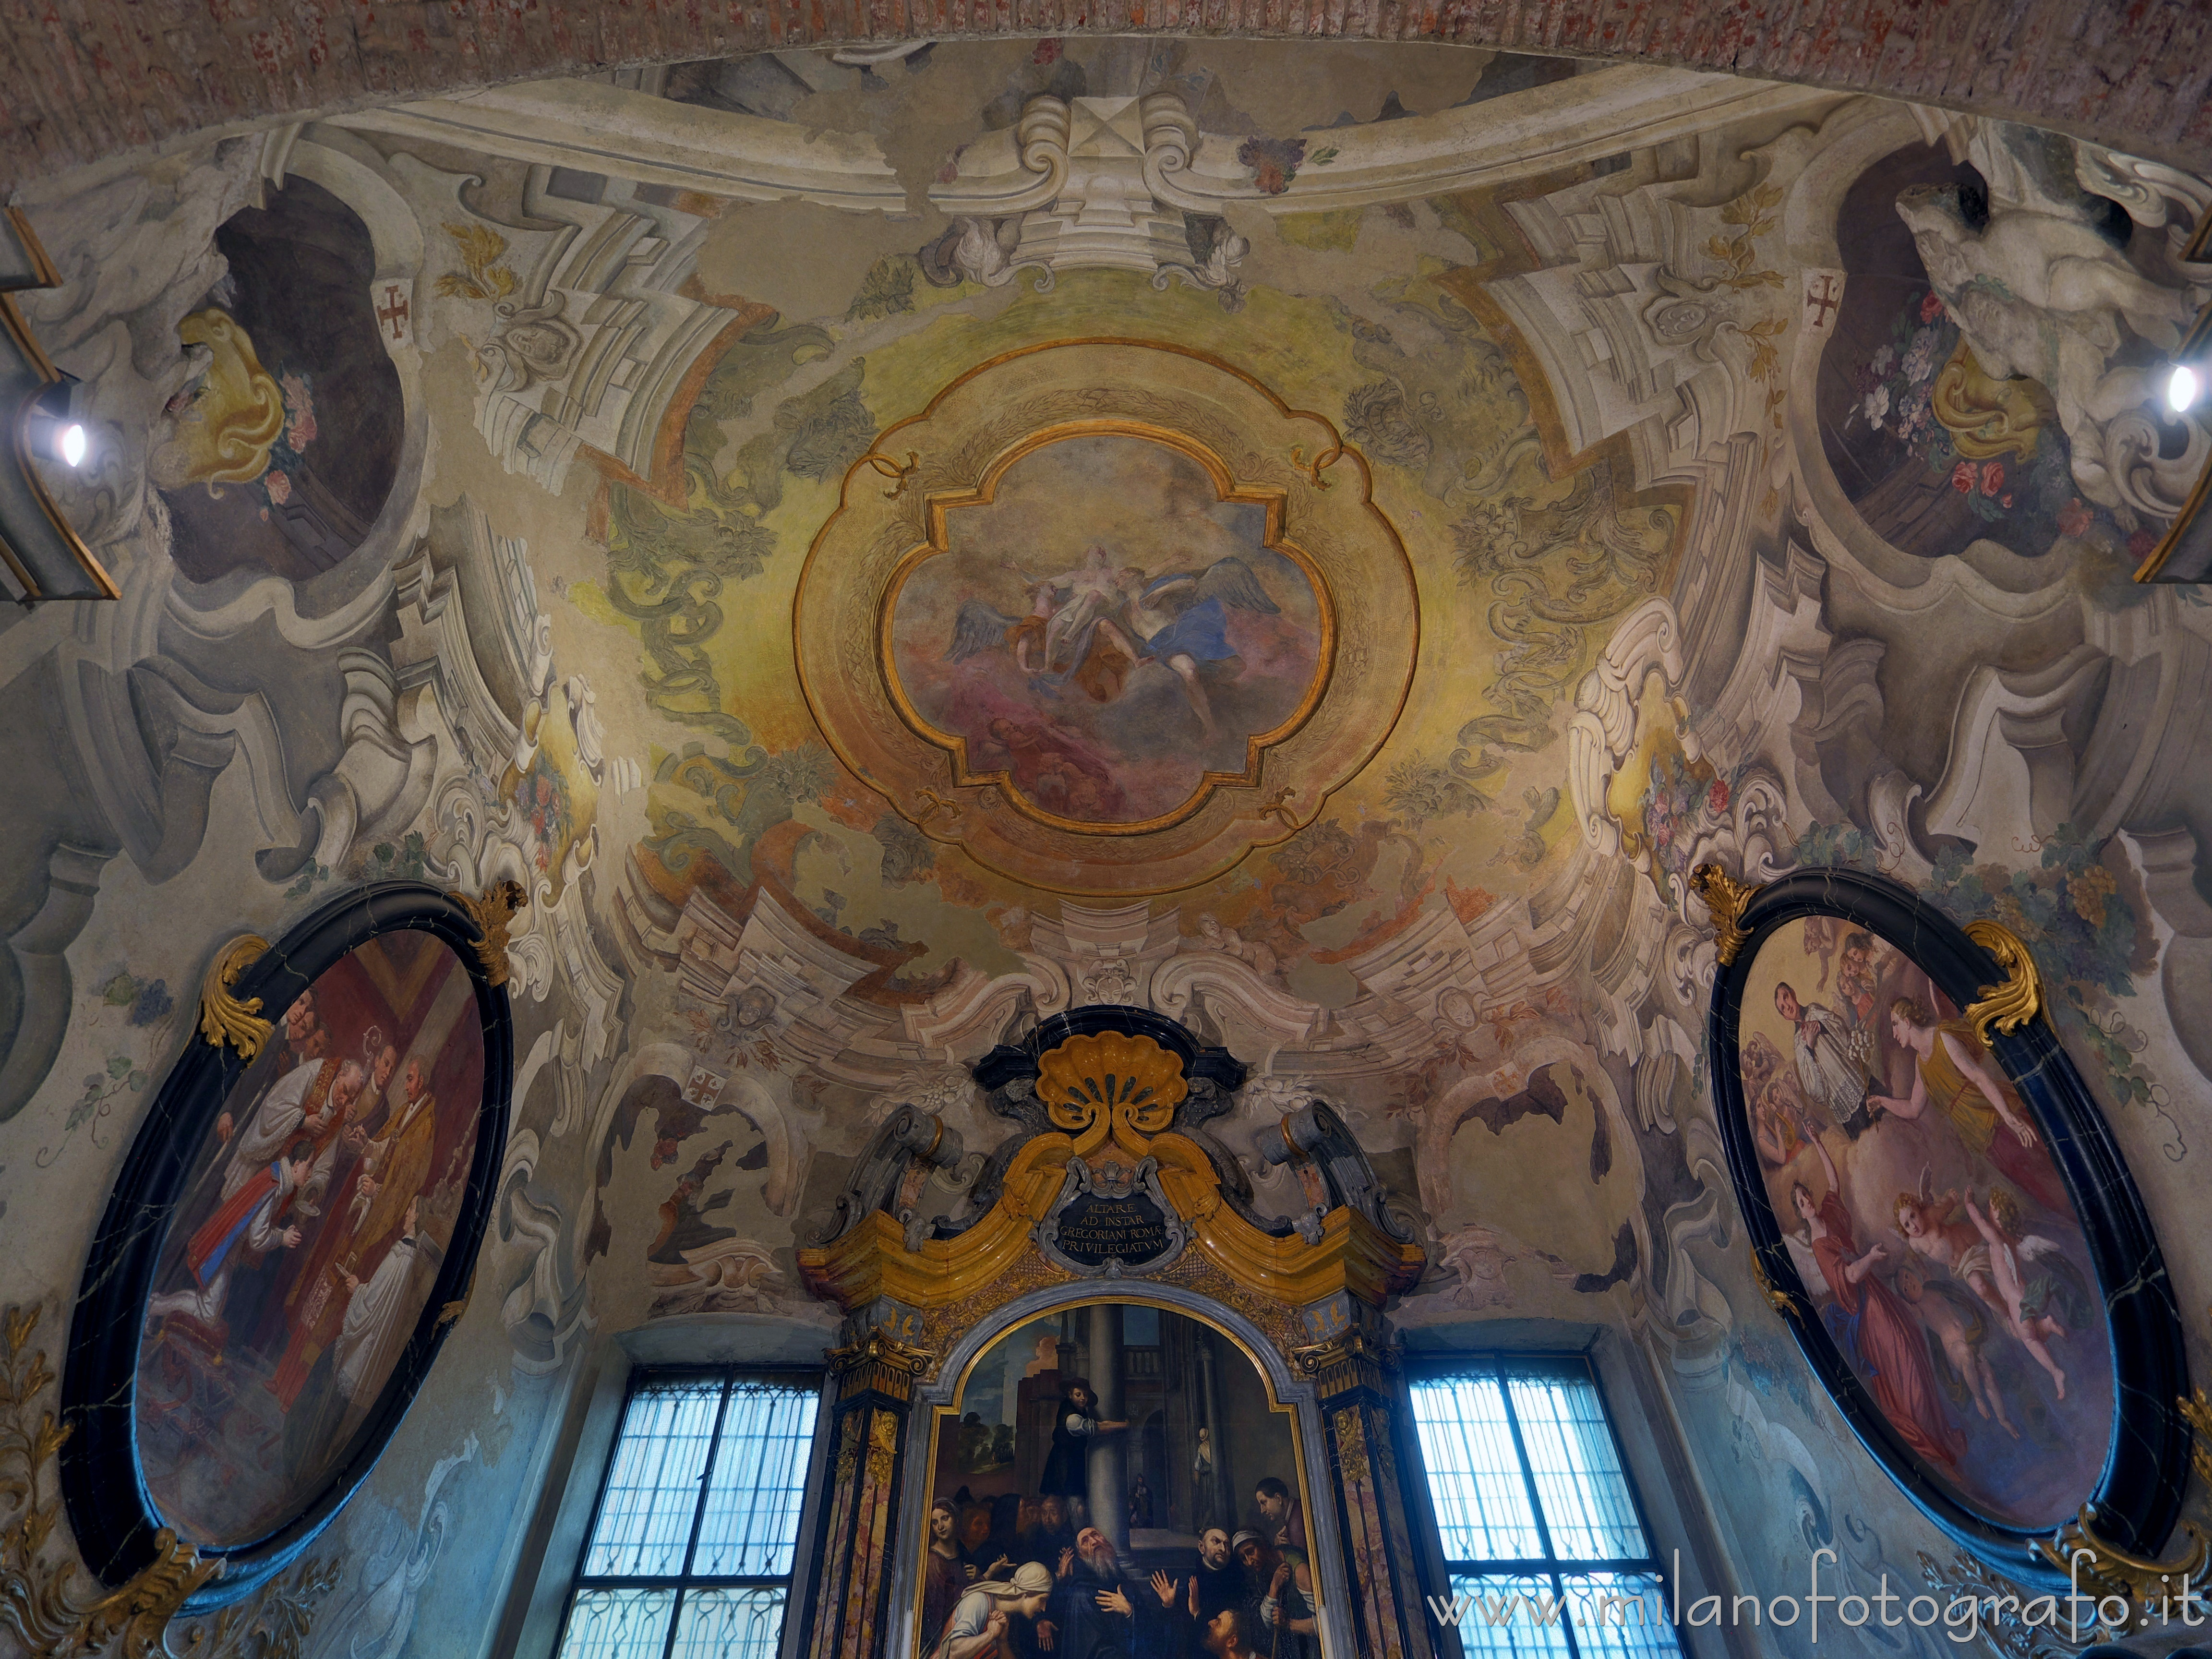 Milan (Italy): Ceiling of the Chapel of San Benedict in the Basilica of San Simpliciano - Milan (Italy)